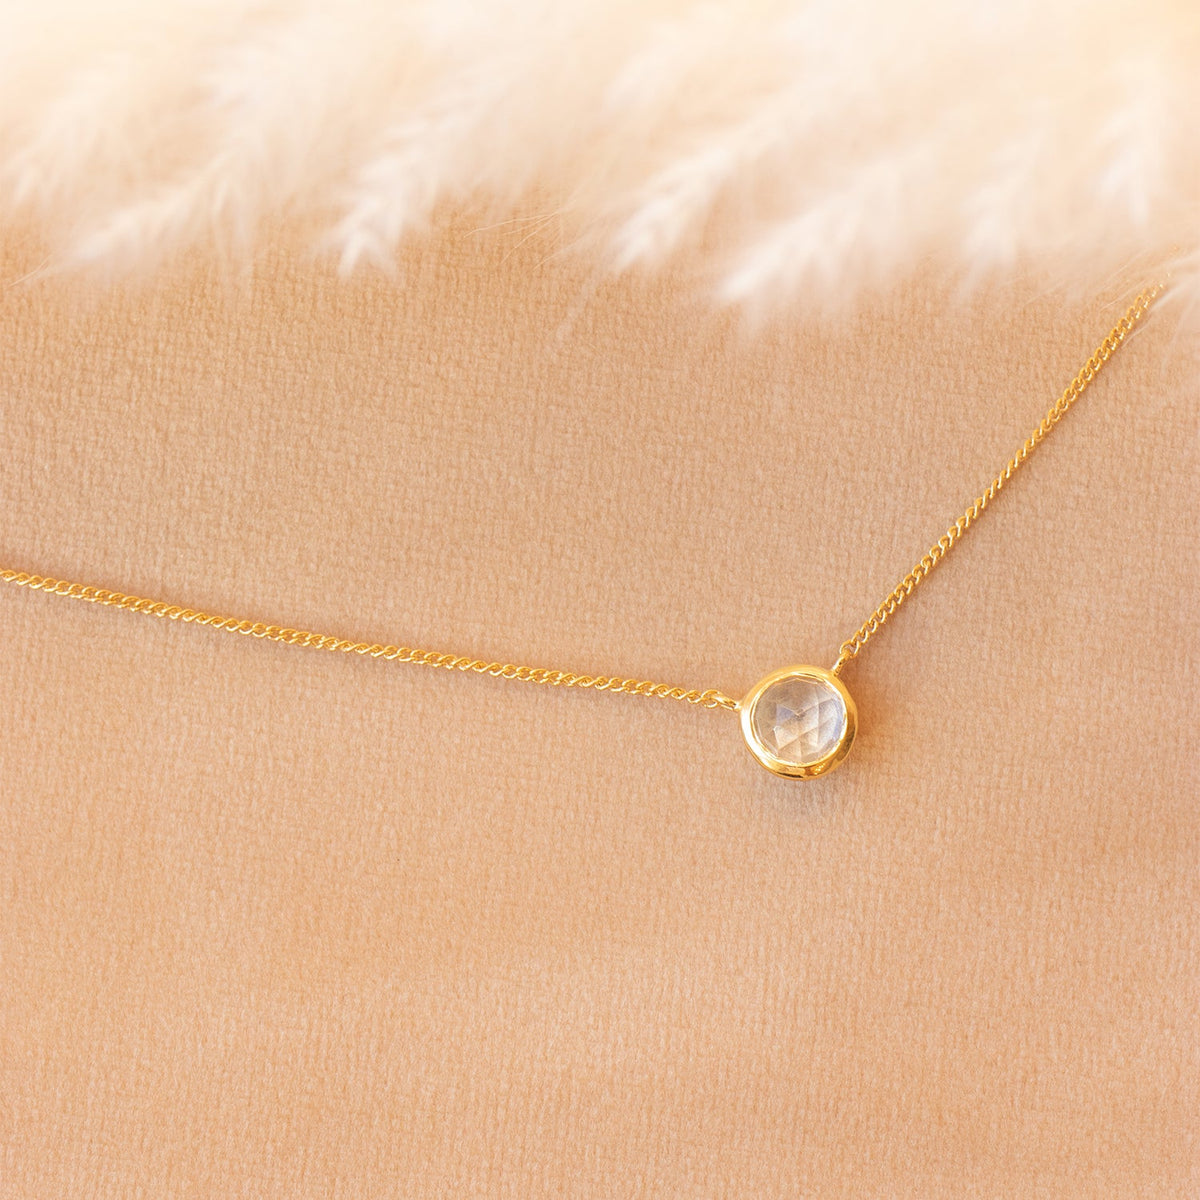 DAINTY LEGACY NECKLACE - WHITE TOPAZ &amp; GOLD - SO PRETTY CARA COTTER